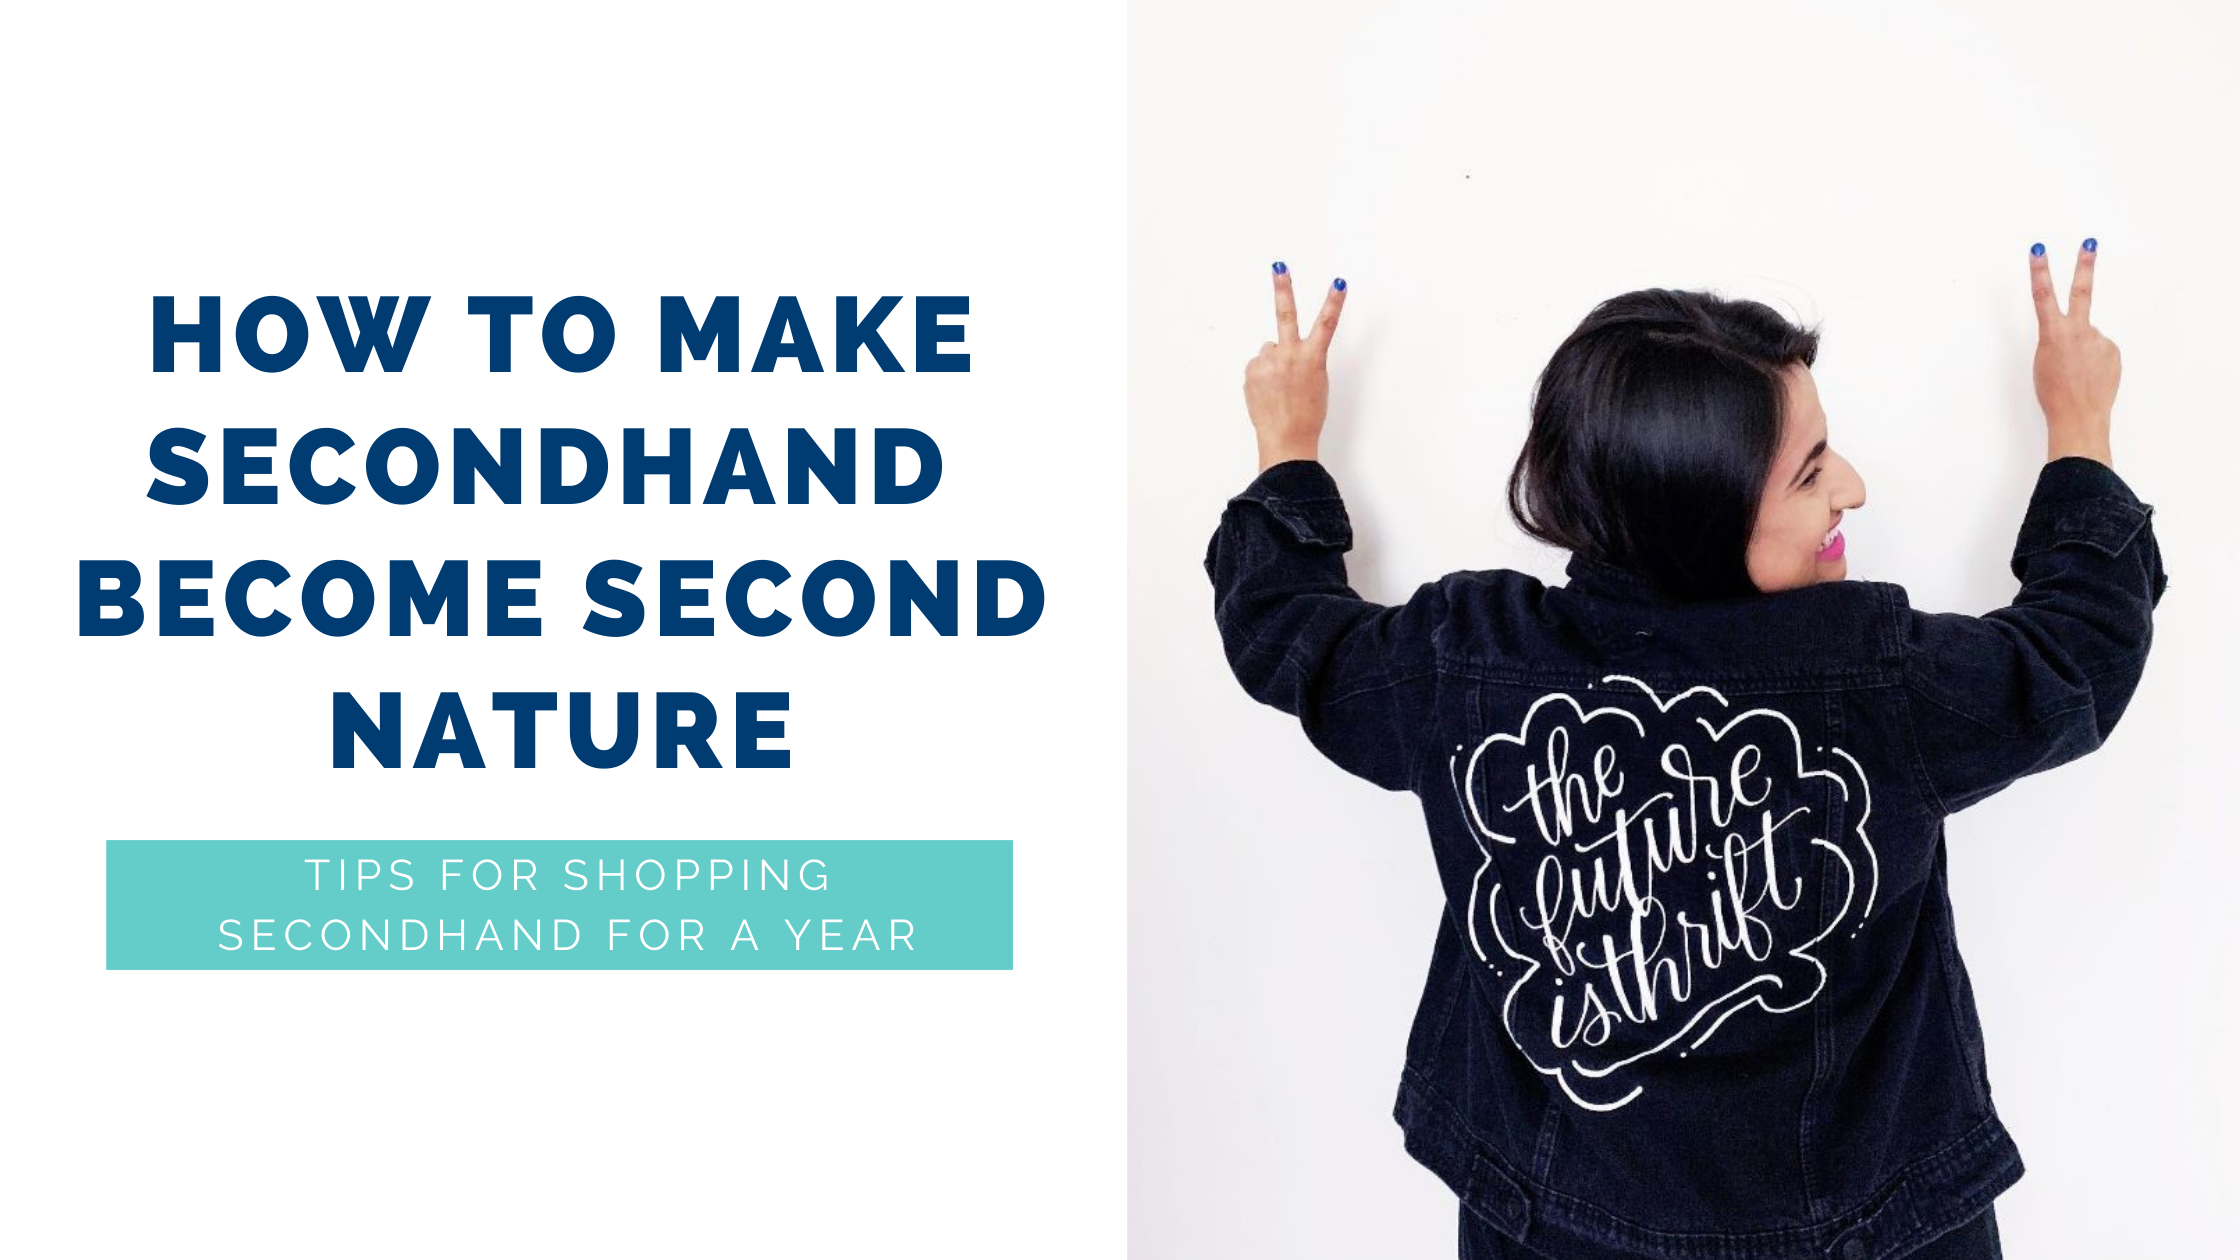 How to Make Secondhand Become Second Nature